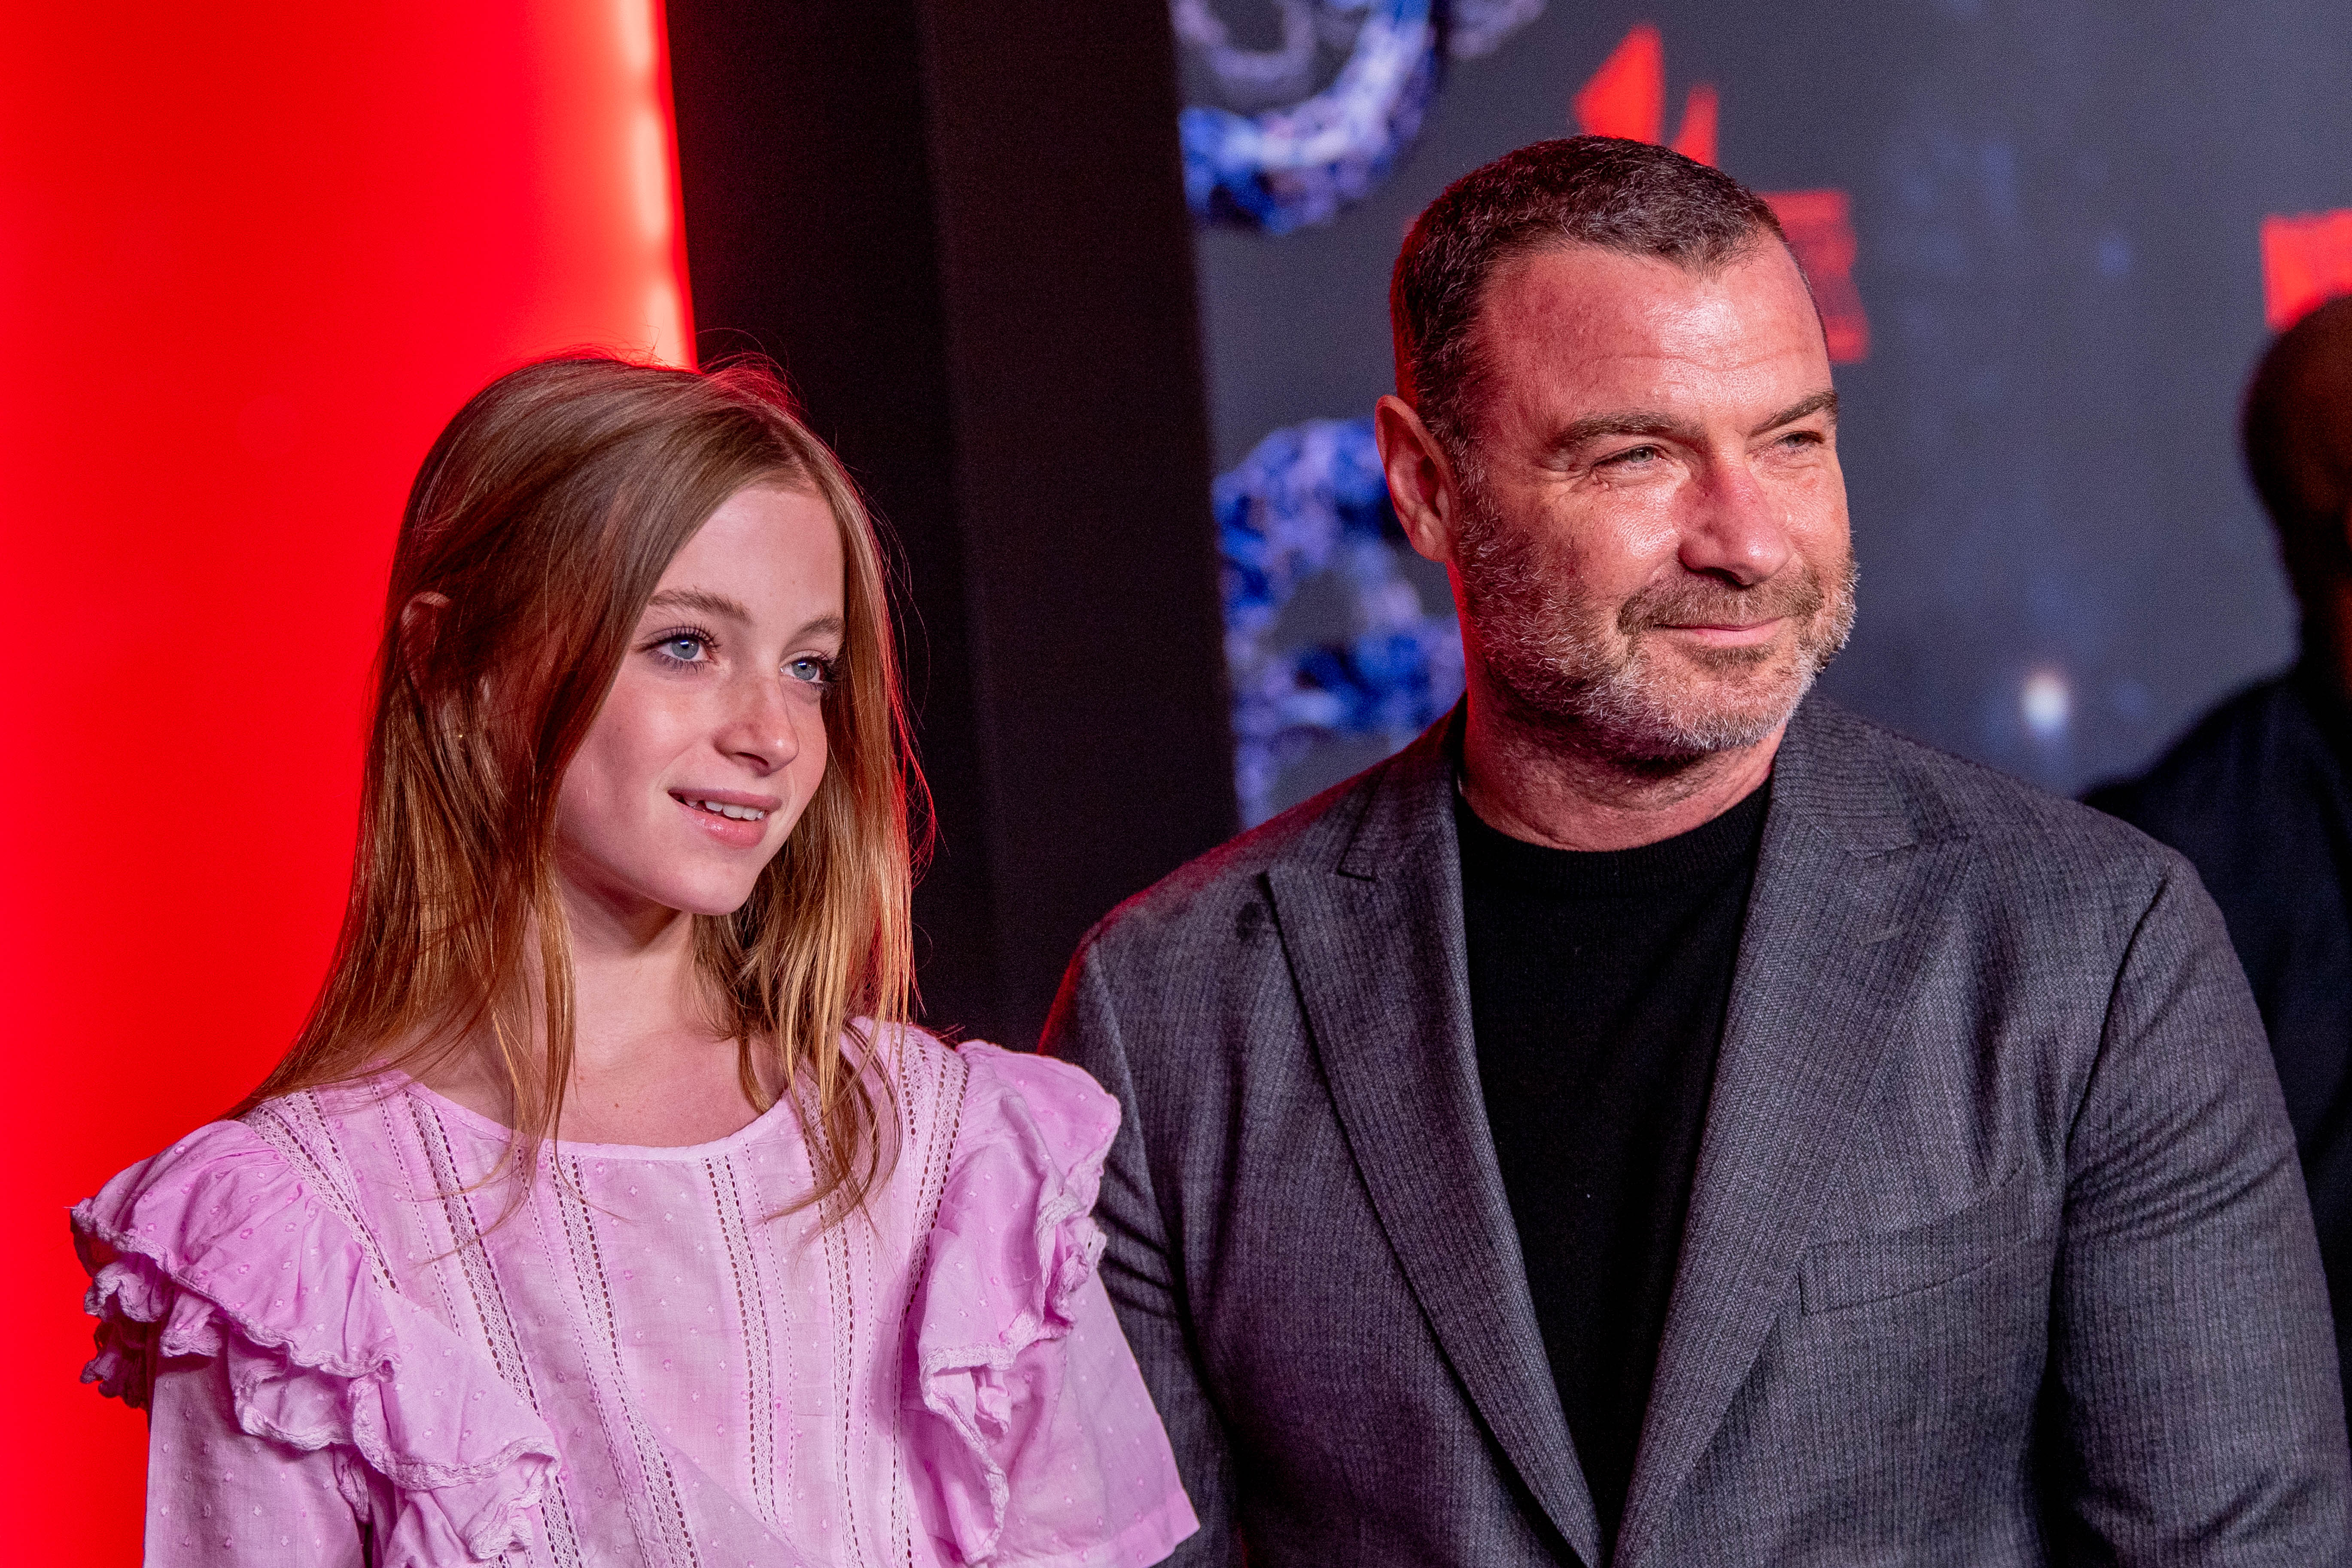 Liev Schreiber with his daughter Khai on May 14, 2022 in Brooklyn, New York. | Source: Getty Images